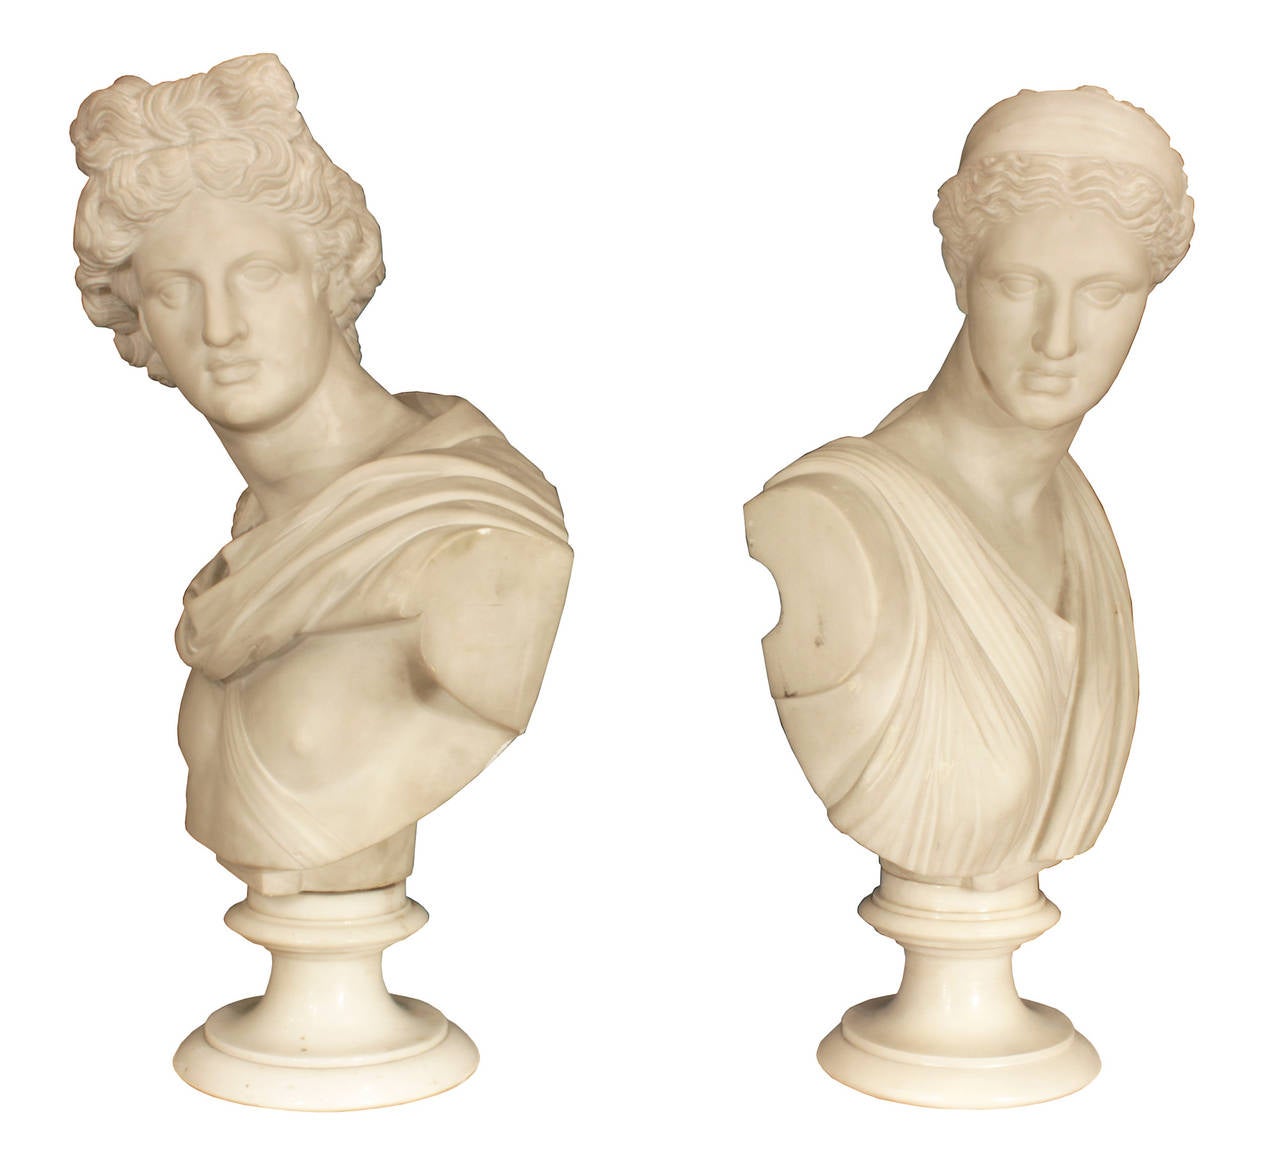 A high quality pair of Italian 19th century white Carrara marble busts of Apollo and Diana. Each bust is raised on a richly detail mottled socle. Apollo is dressed in a draped paludamentum fastened by a fibula, gazing at Diana. Diana in classical